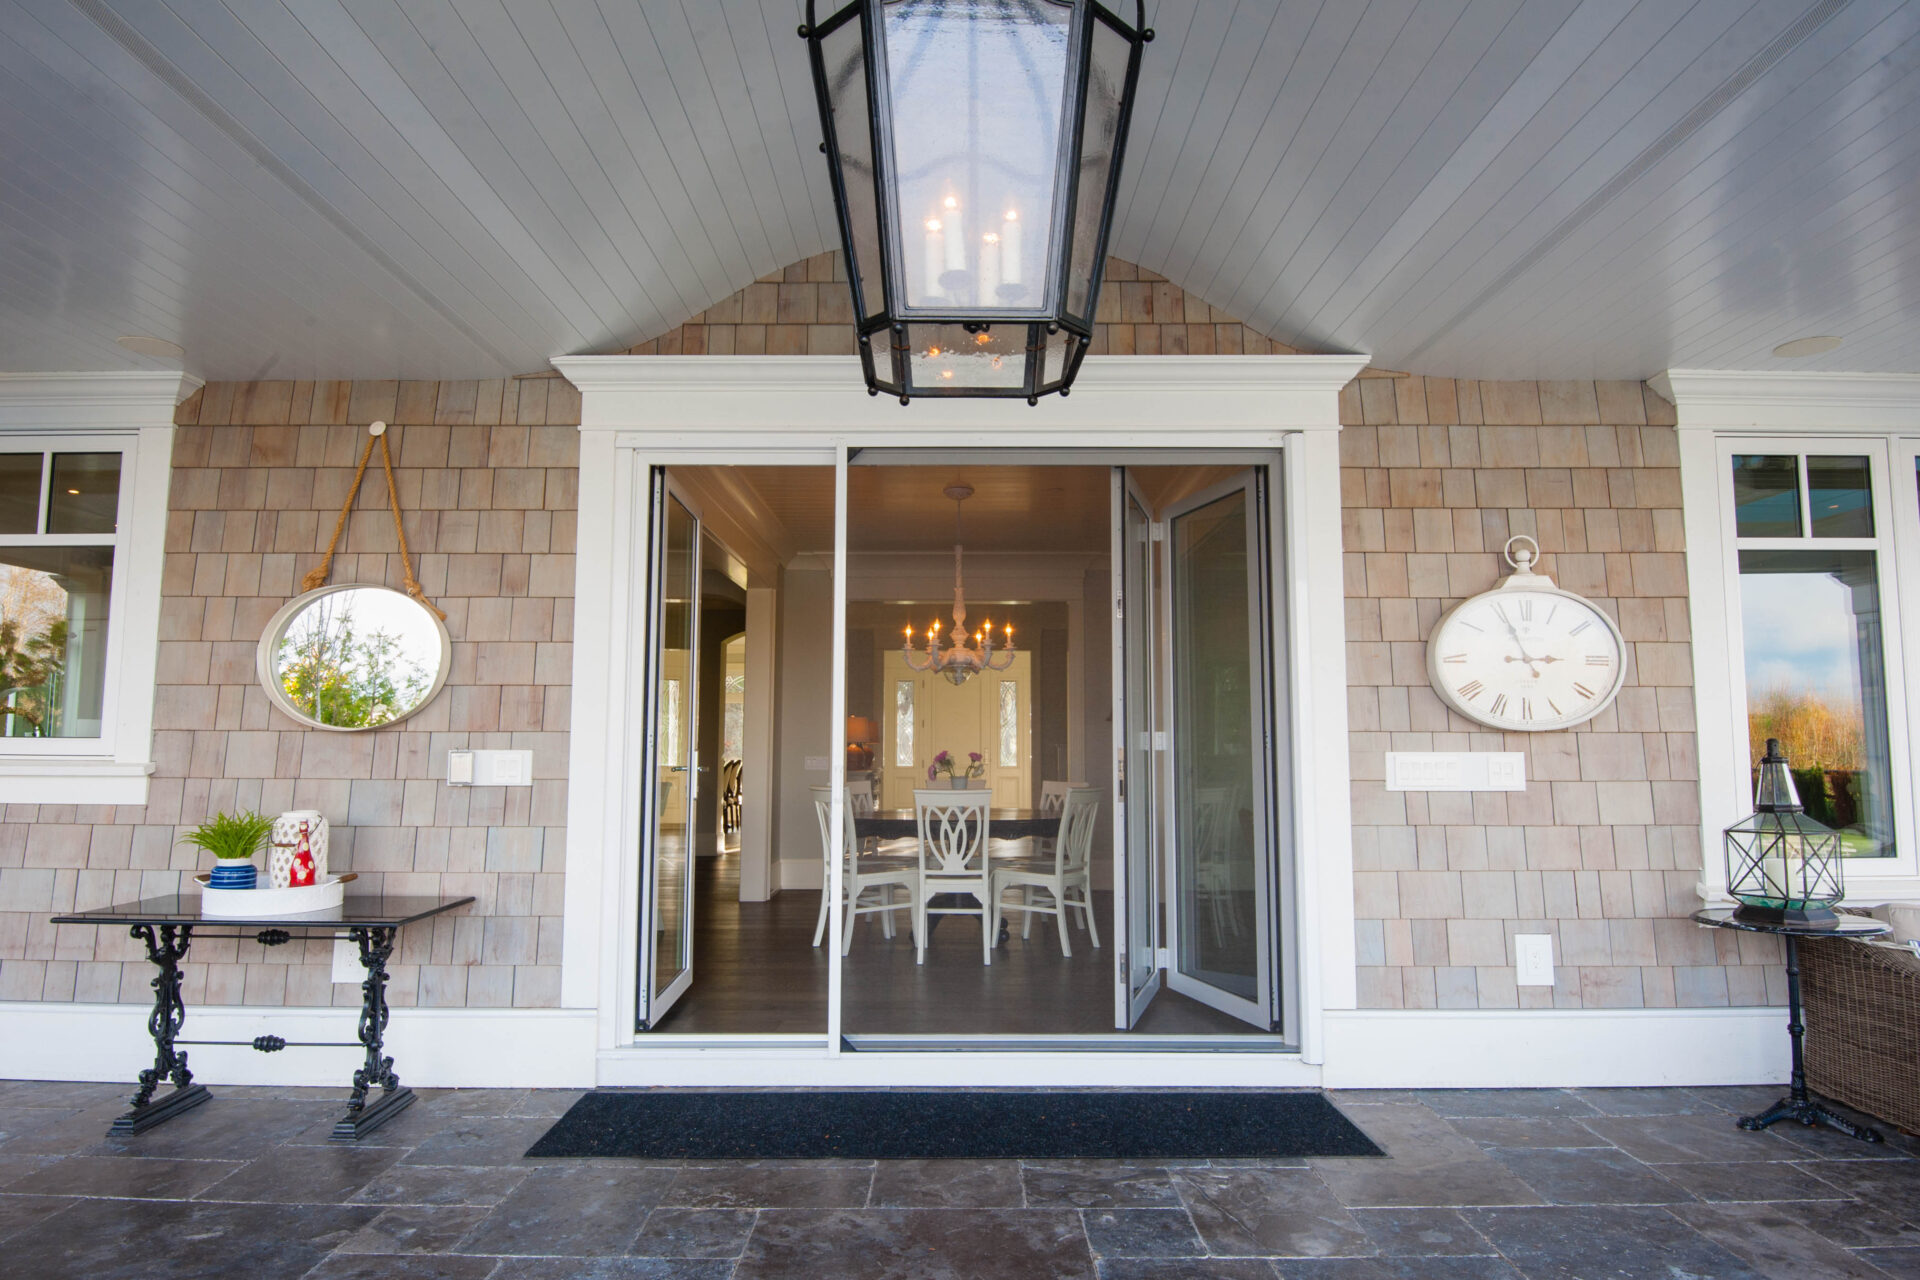 Phantom's Extra-Large Retractable Wall Screen Door spans up to fifteen feet wide per unit and is perfect for bi-fold doors, sliding and folding door systems, and large patio openings.